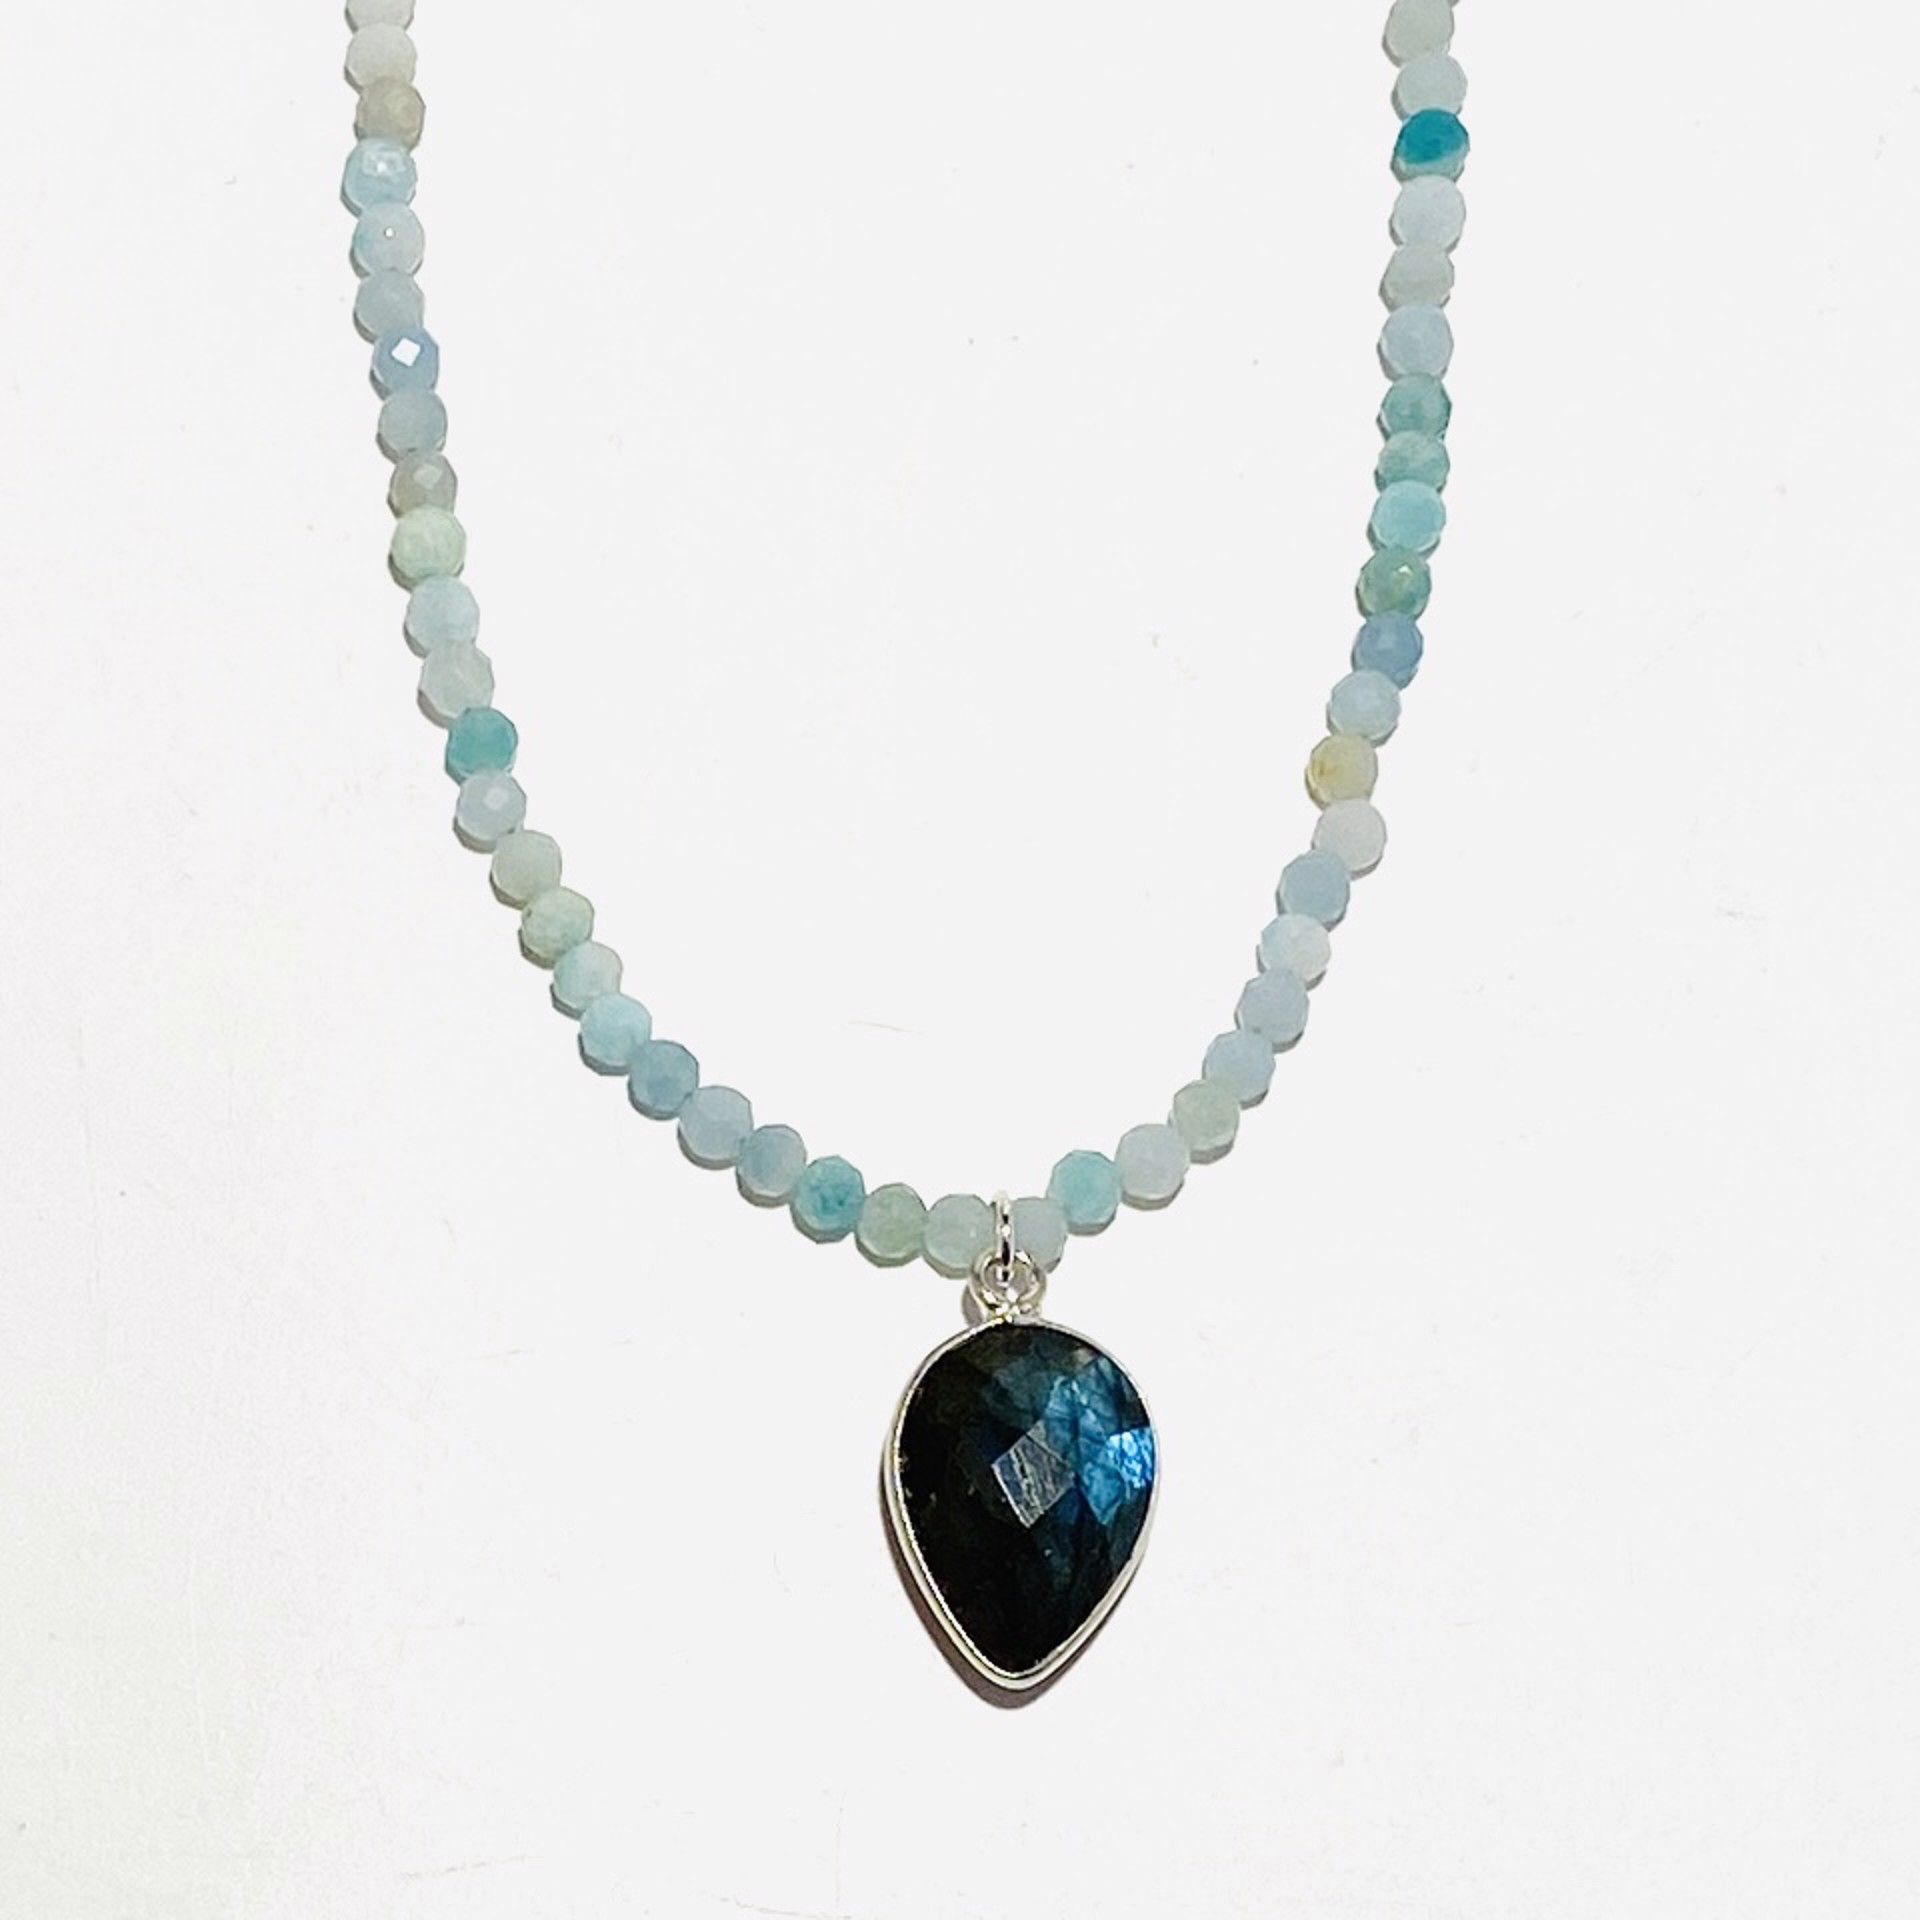 Faceted Amazonite Faceted Labradorite Teardrop Pendant Necklace by Nance Trueworthy